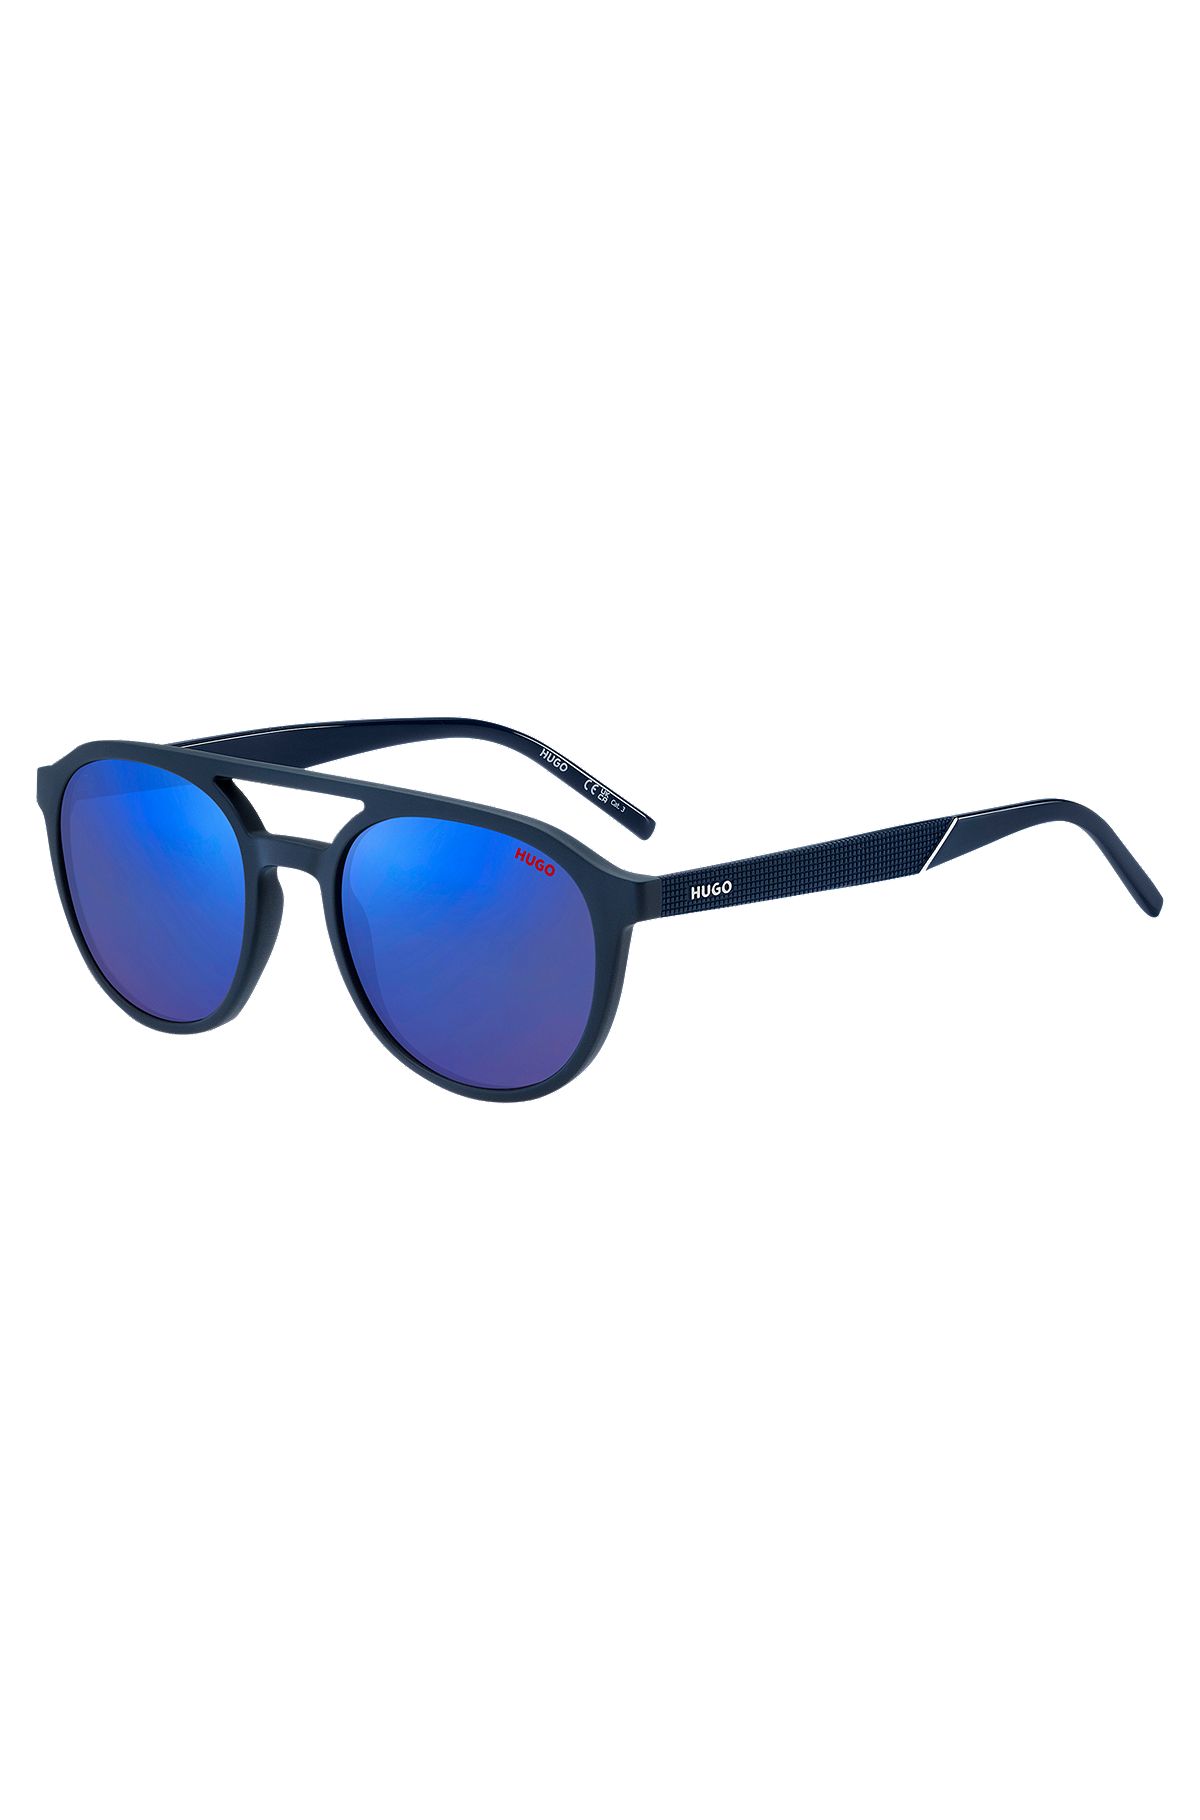 Navy-acetate sunglasses with blue lenses and patterned temples, Blue